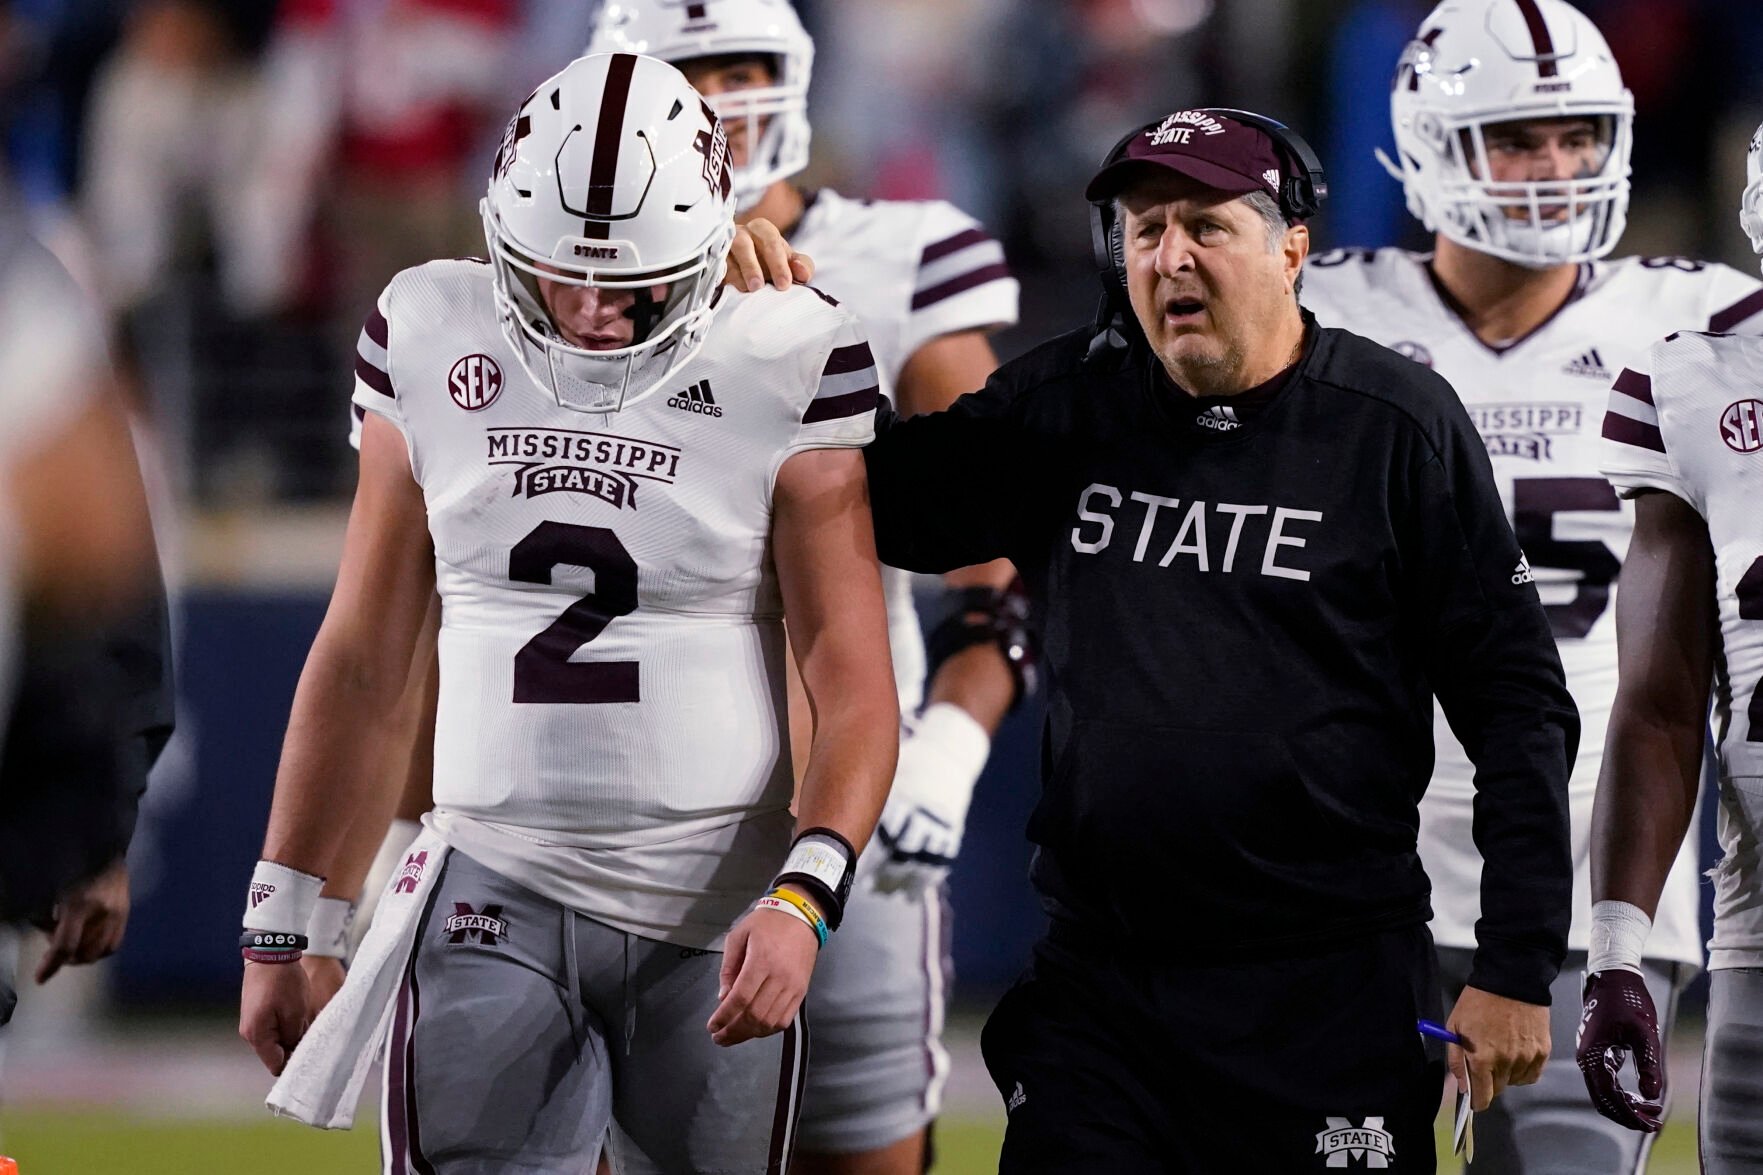 Mississippi State football coach Mike Leach dies after complications from heart condition pic